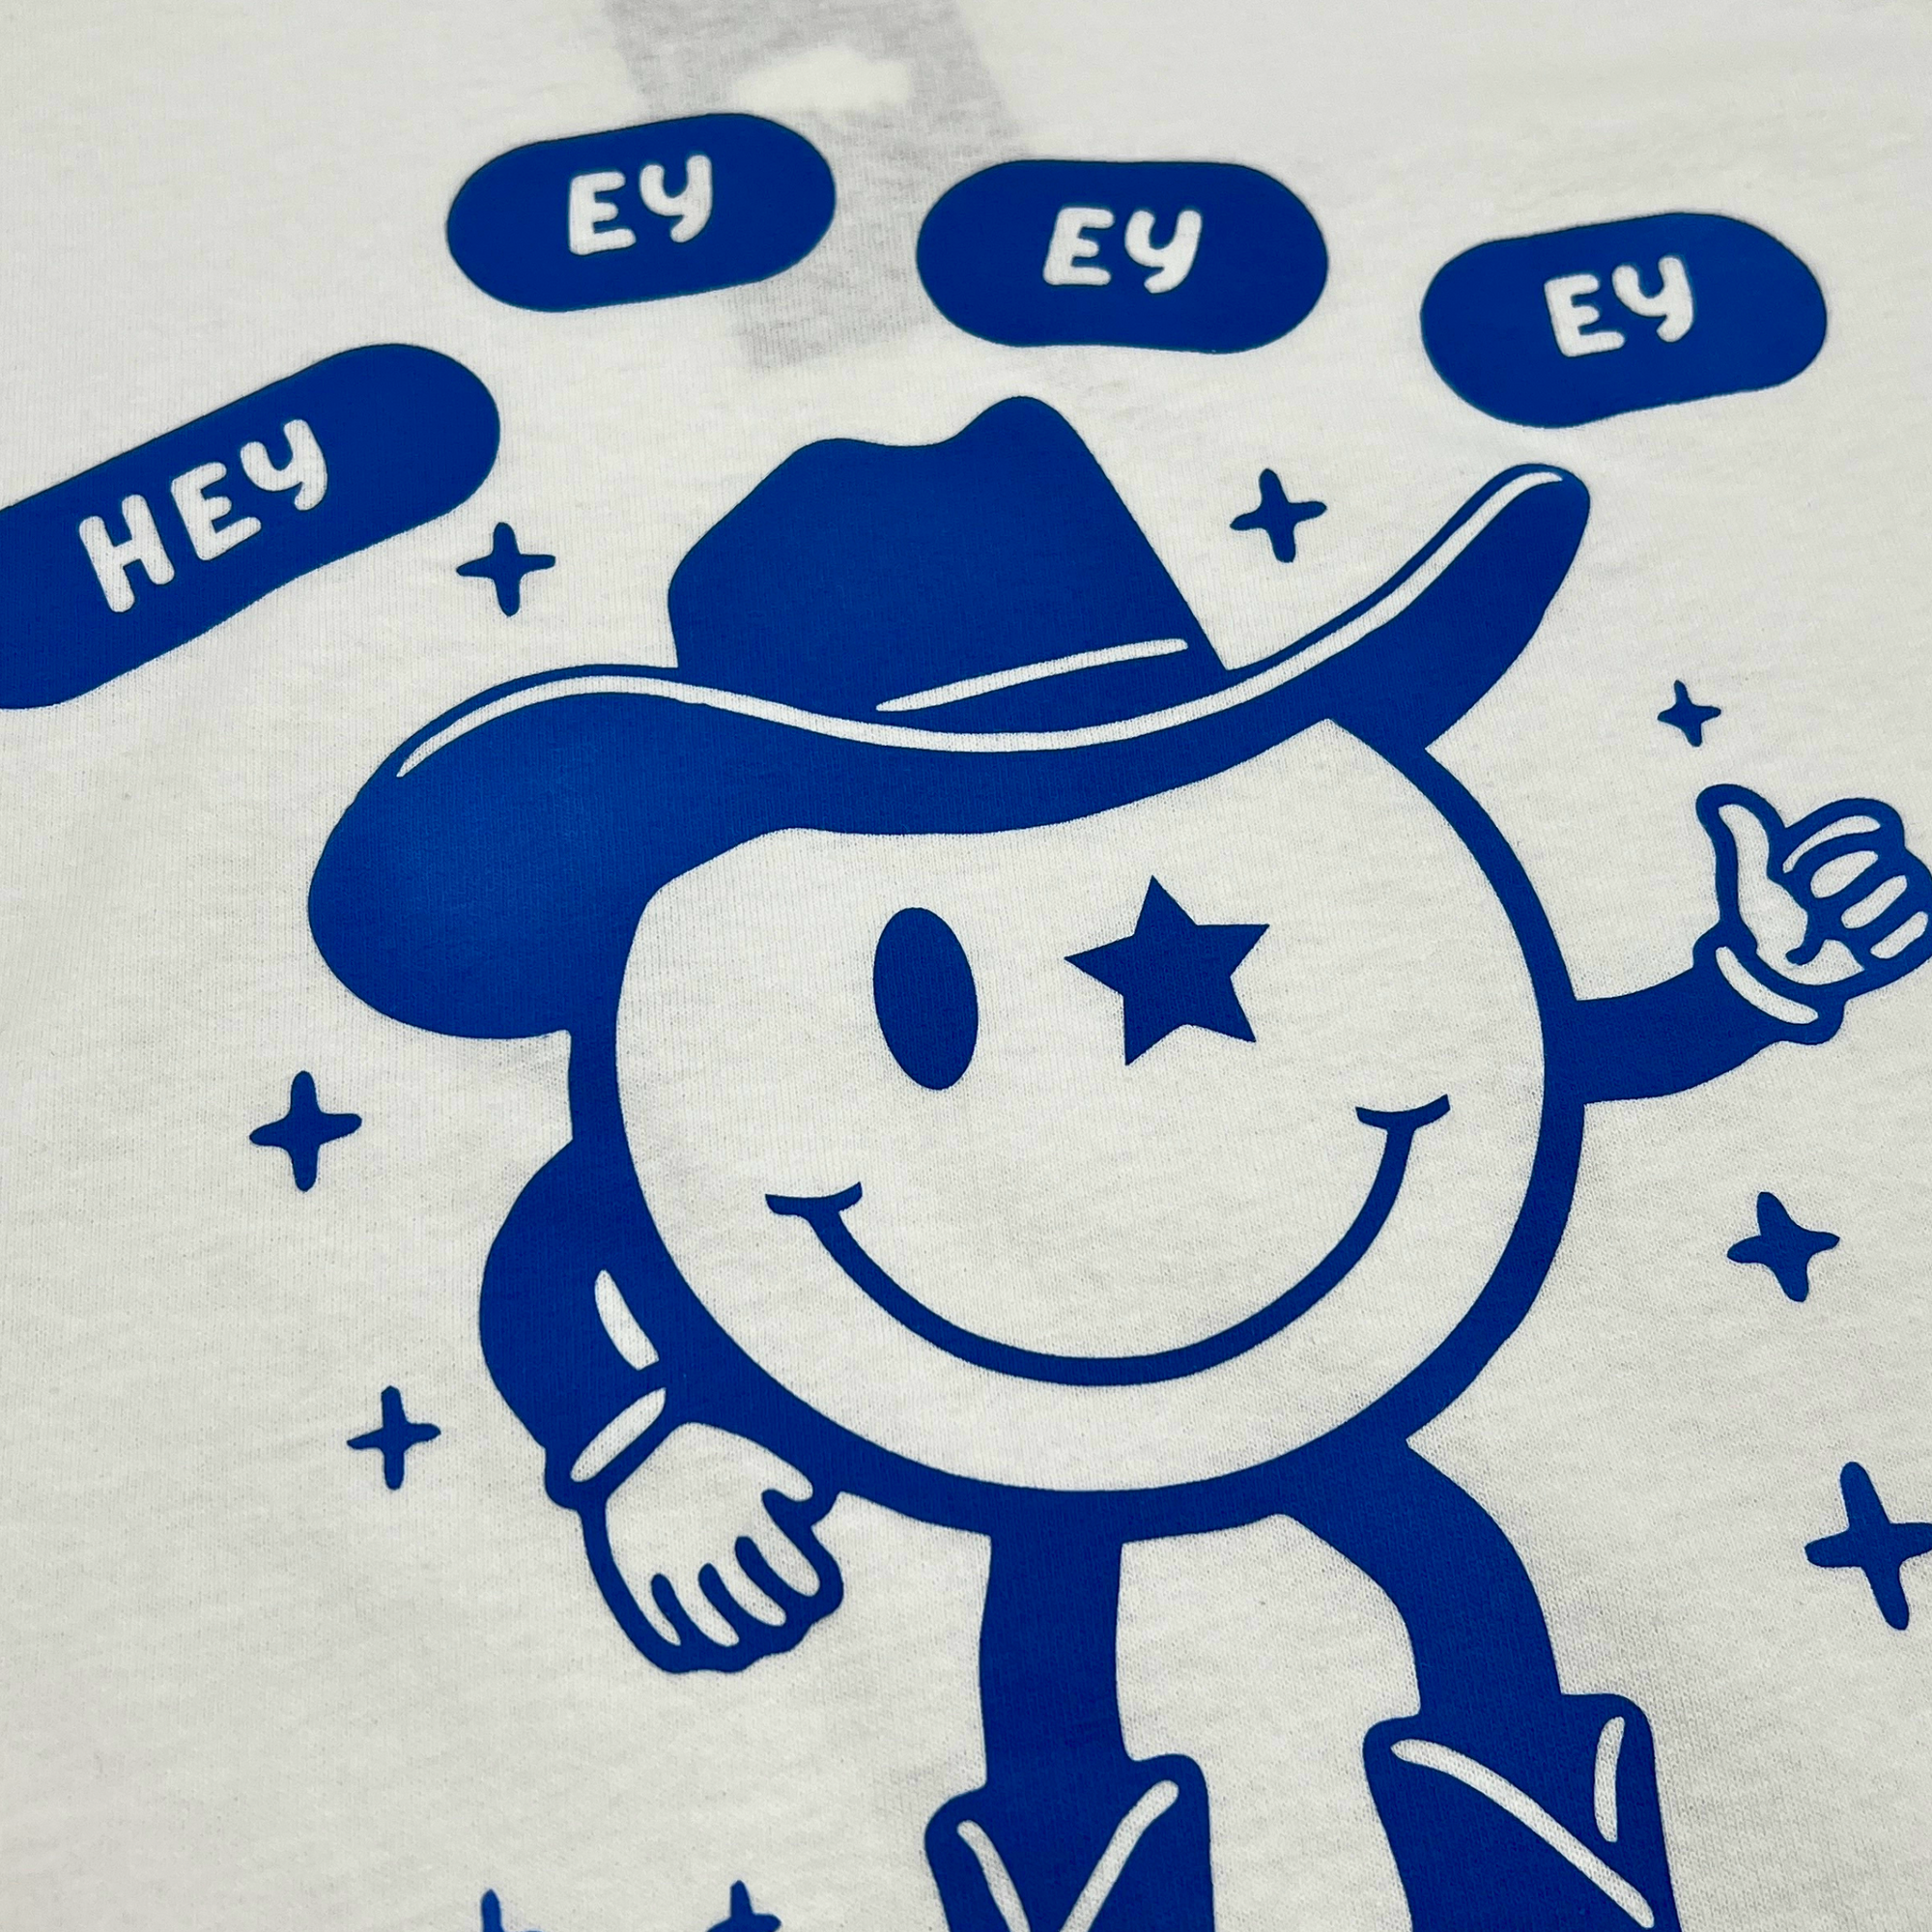 Have A Howdy Day White Short Sleeve Shirt